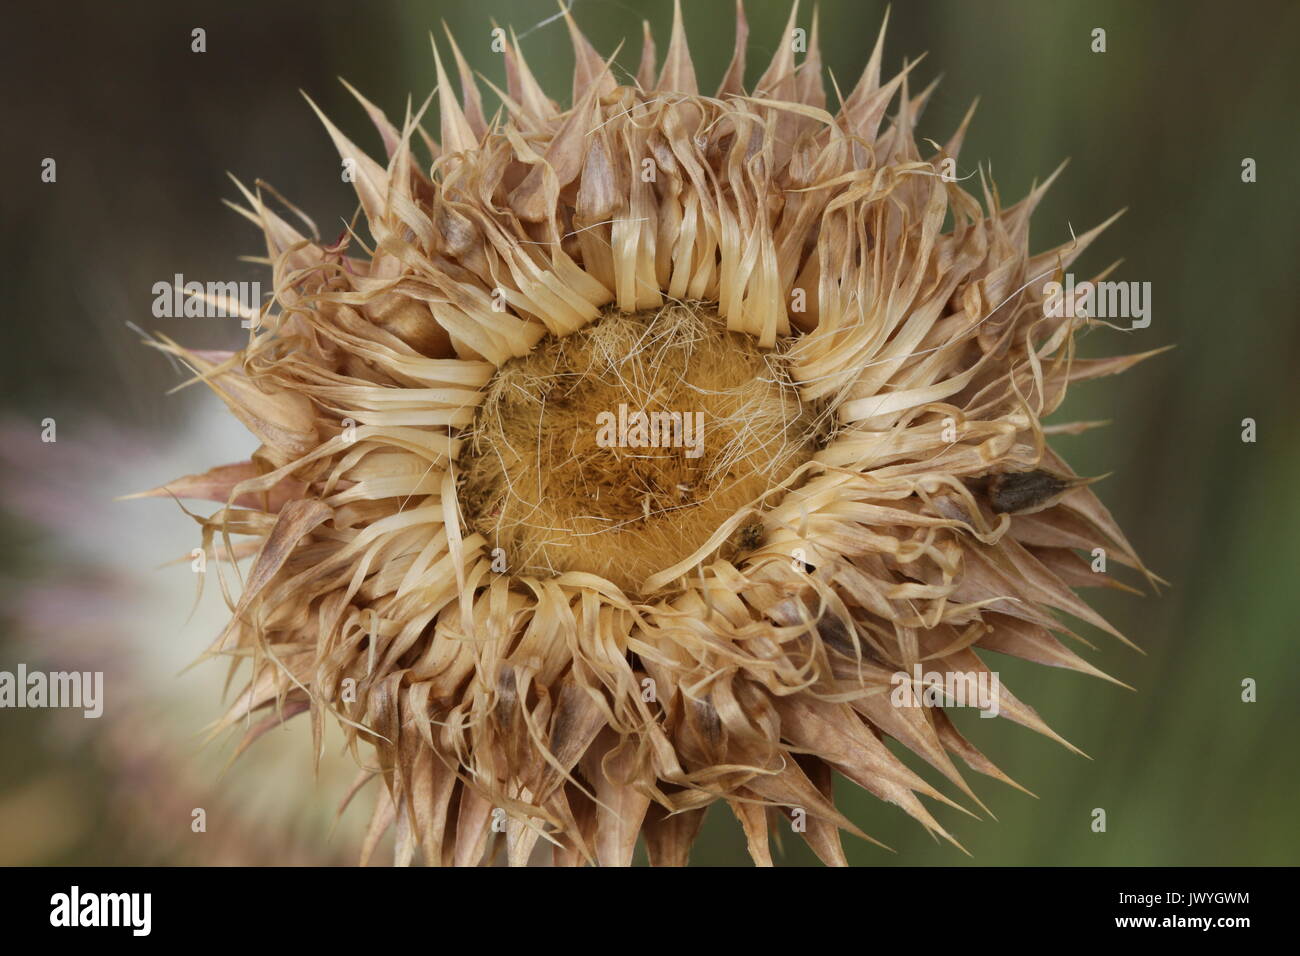 Dried thistle bloom Stock Photo